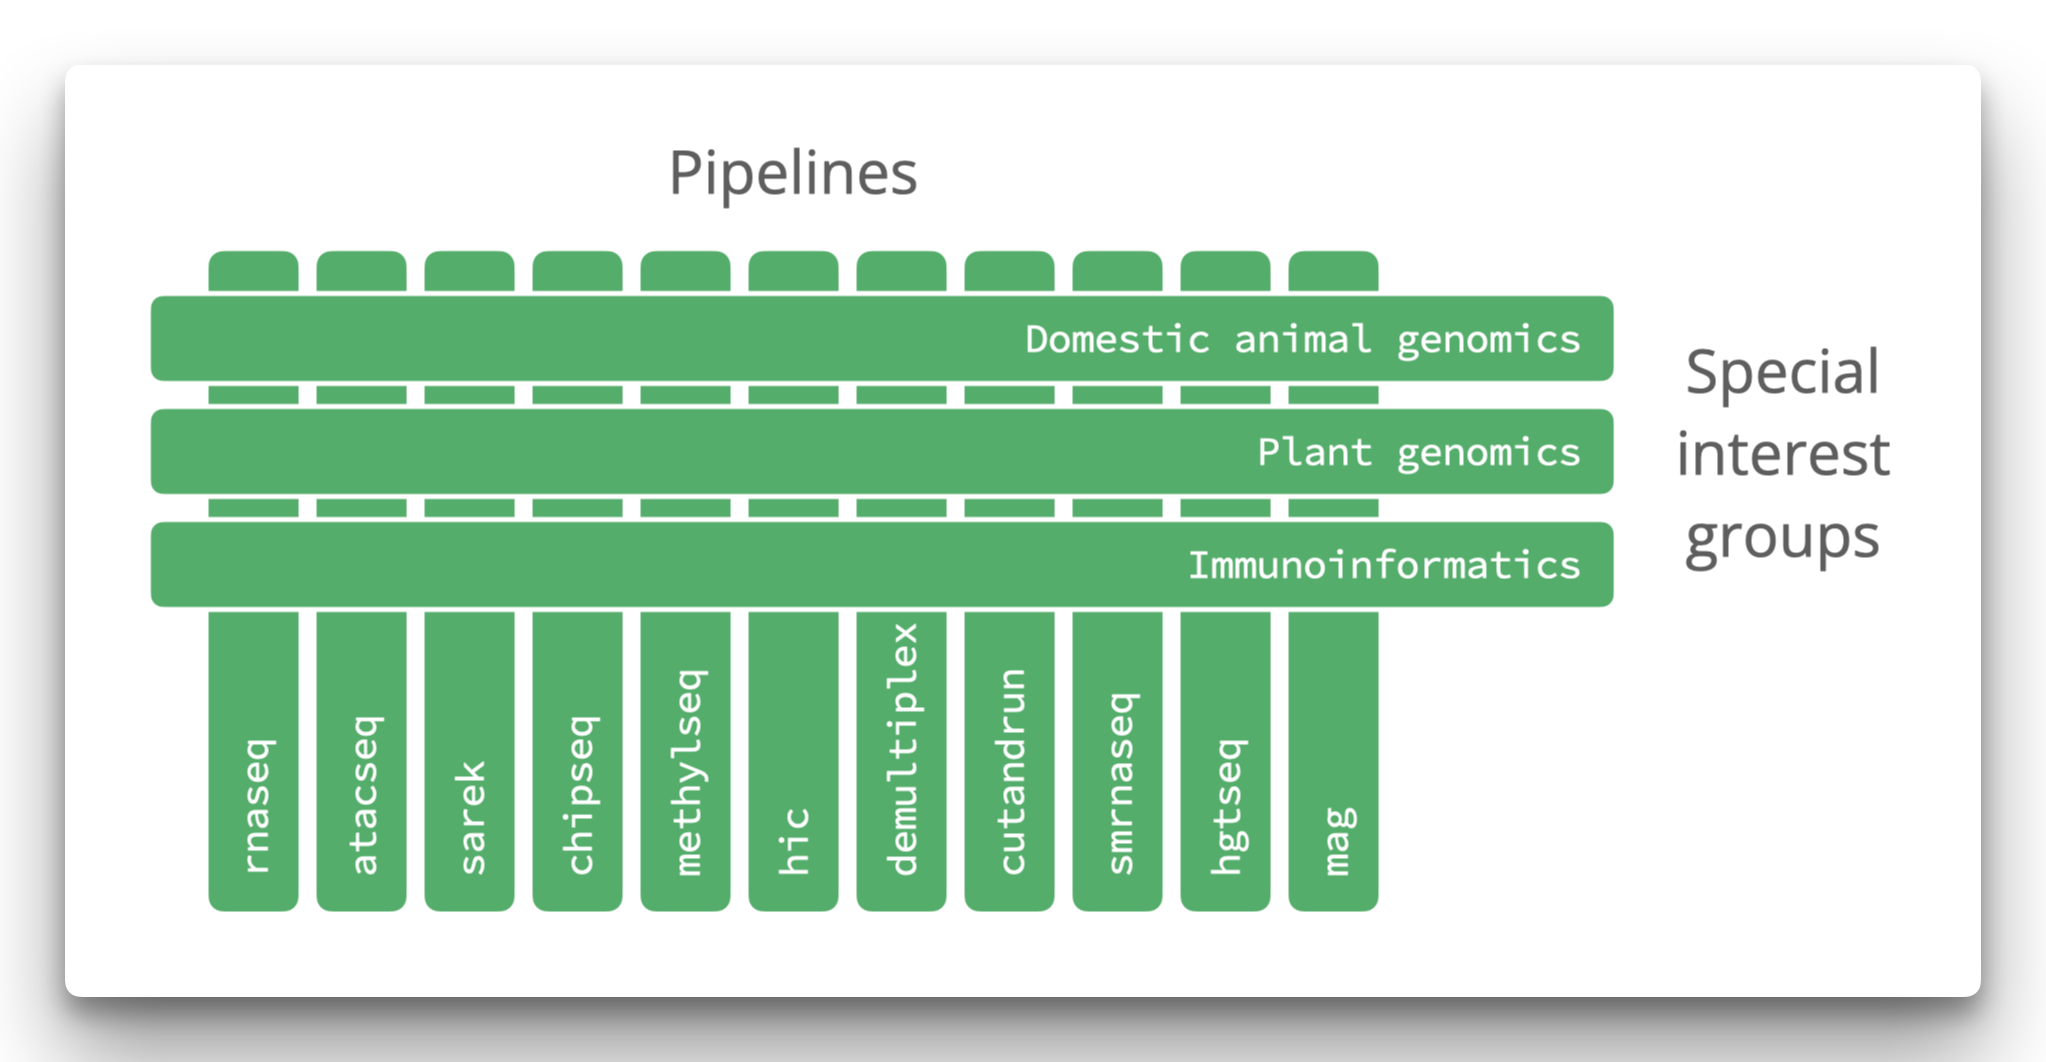 Cross-functional pipelines and interest group structure